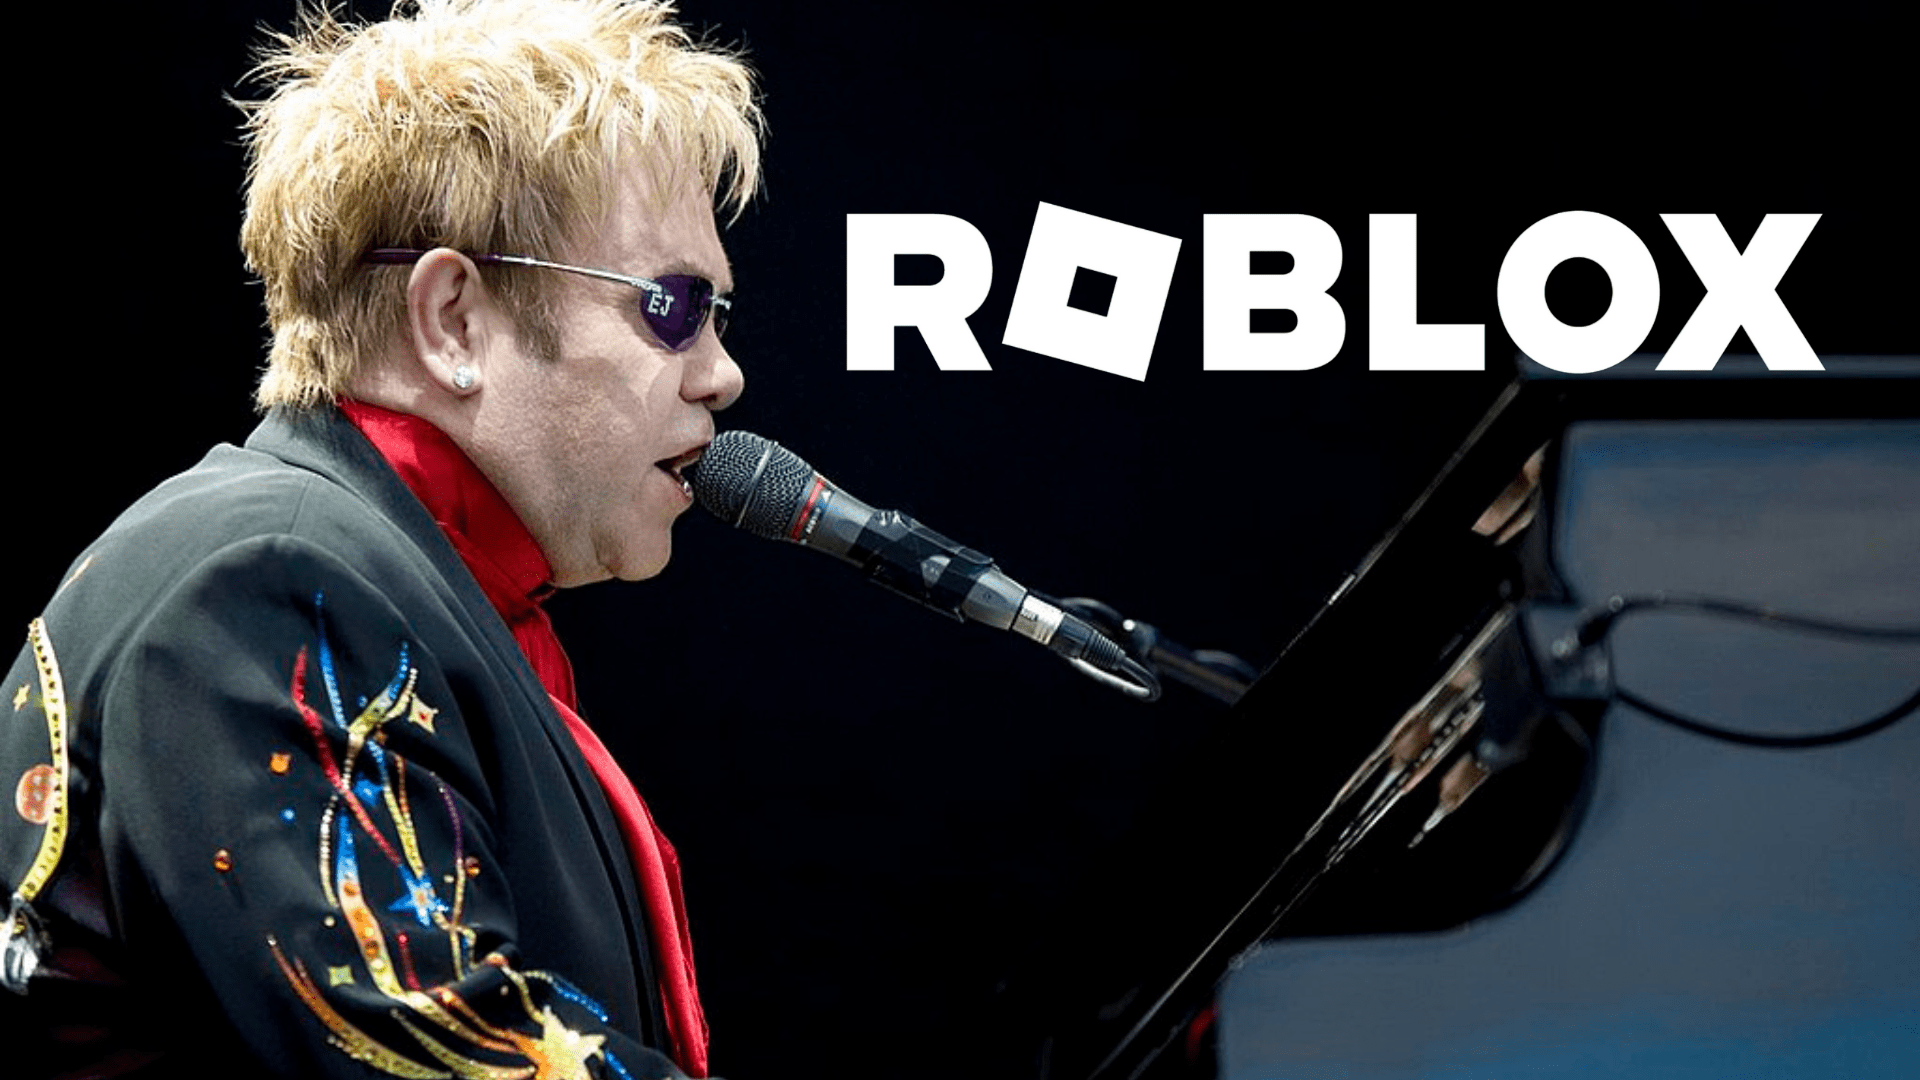 Roblox & Elton John Team Up For Virtual Concert & New Player Outfits